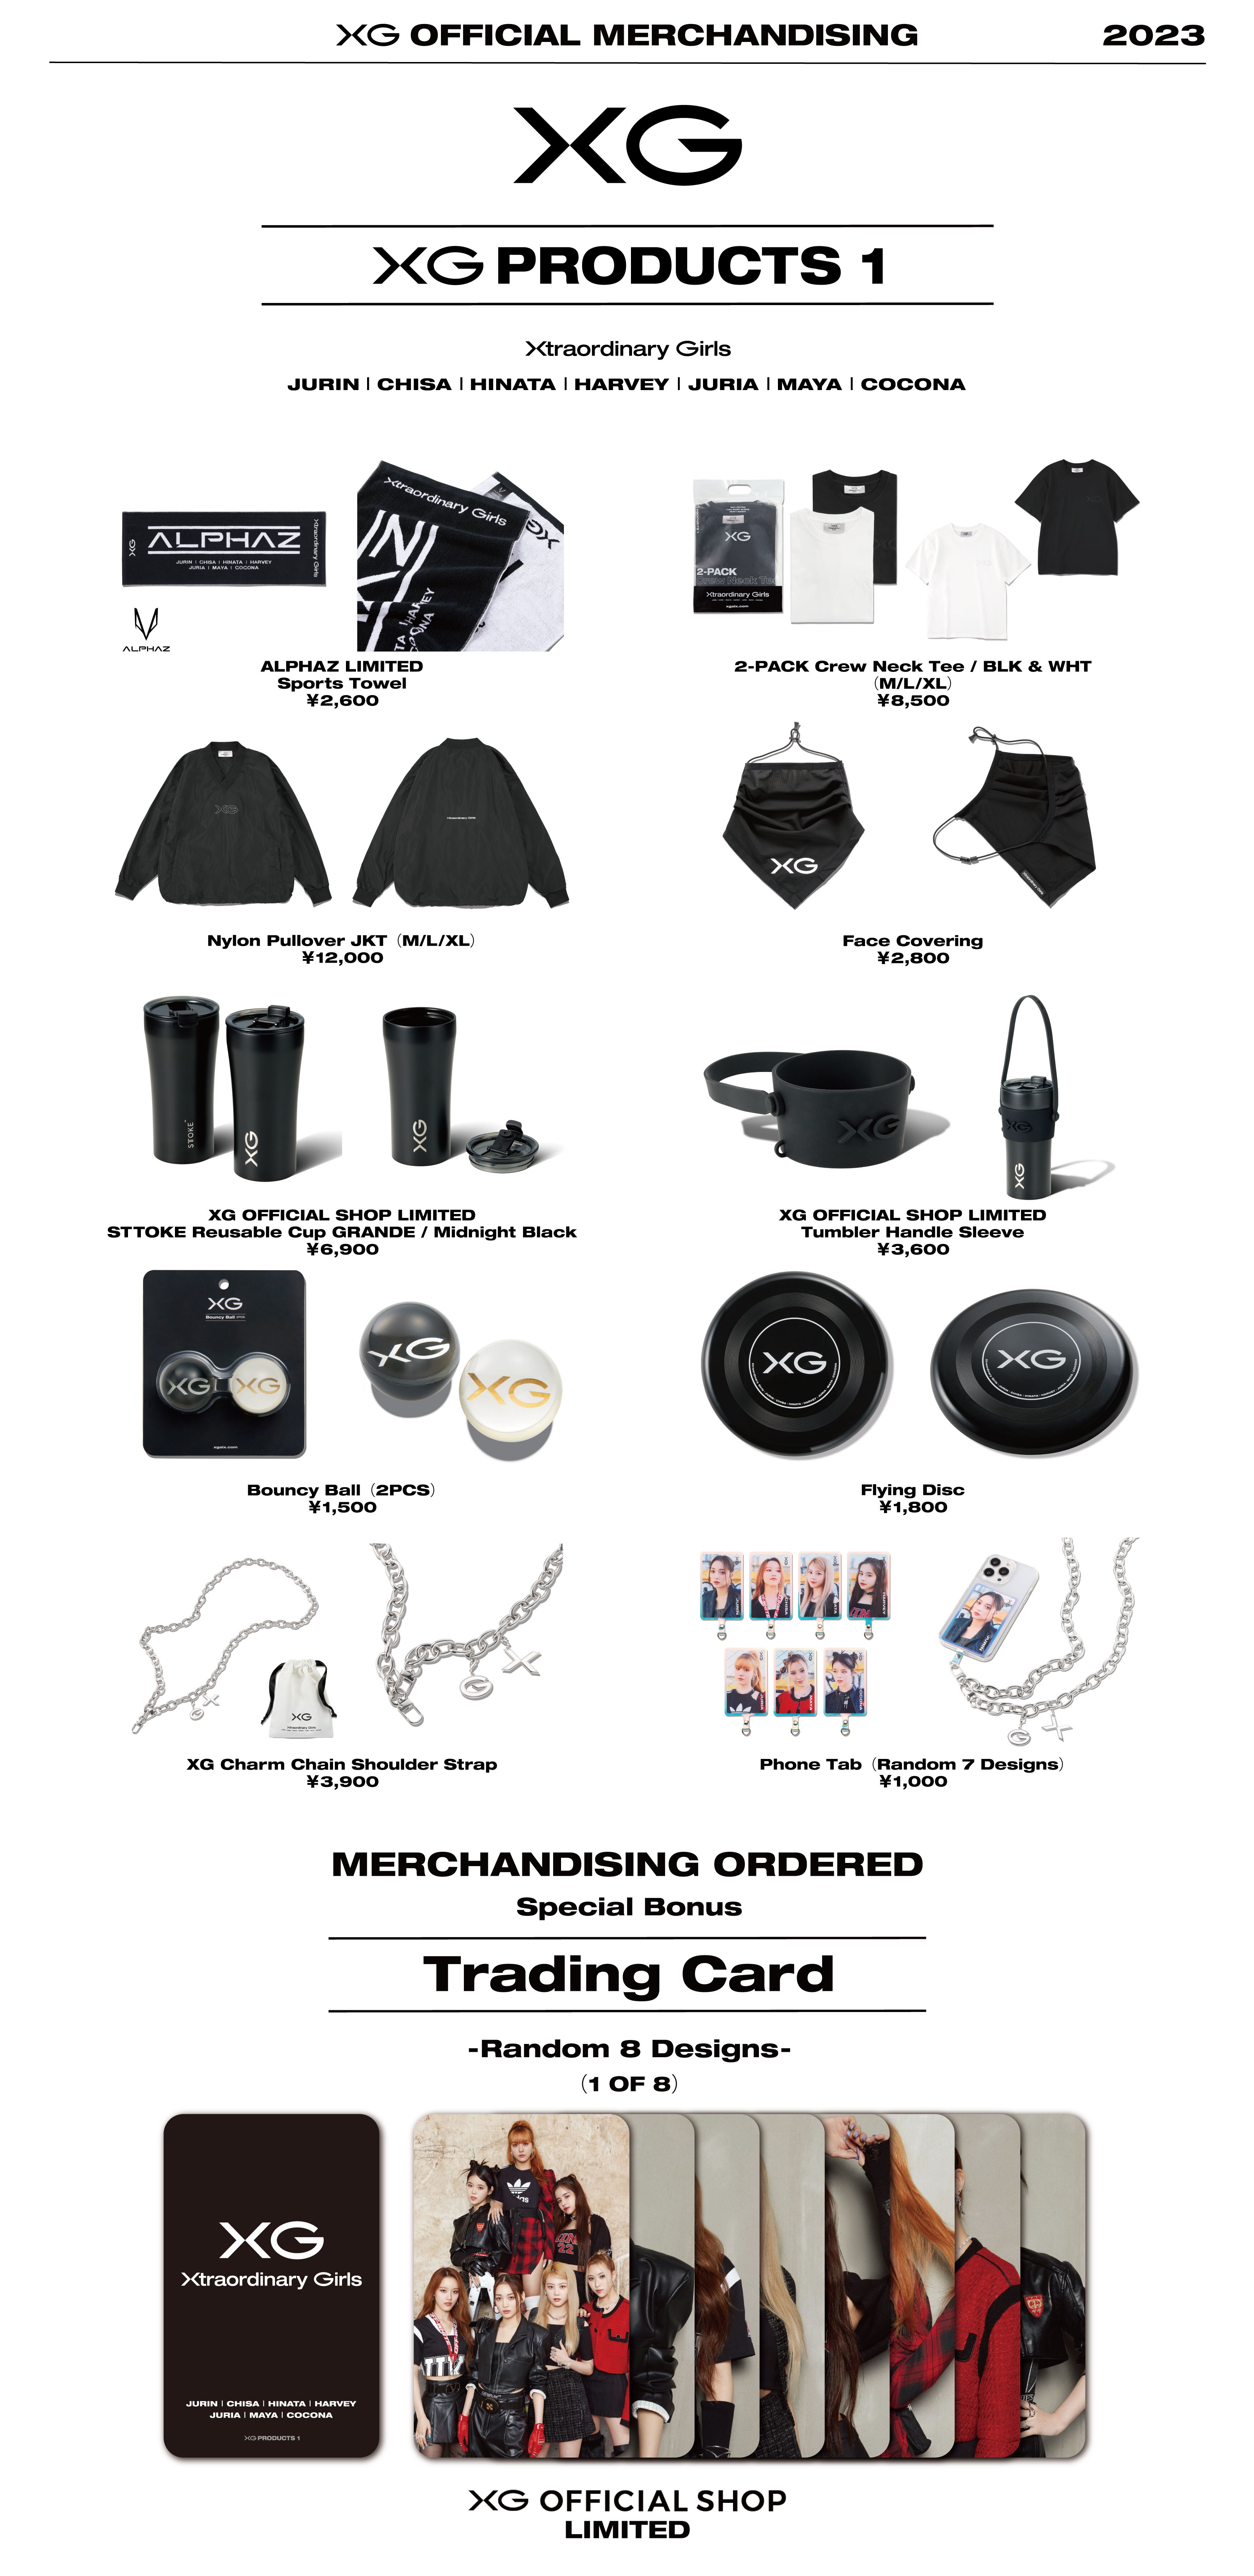 XG OFFICIAL MERCHANDISE “XG PRODUCTS 1” Launch Details! - NEWS 